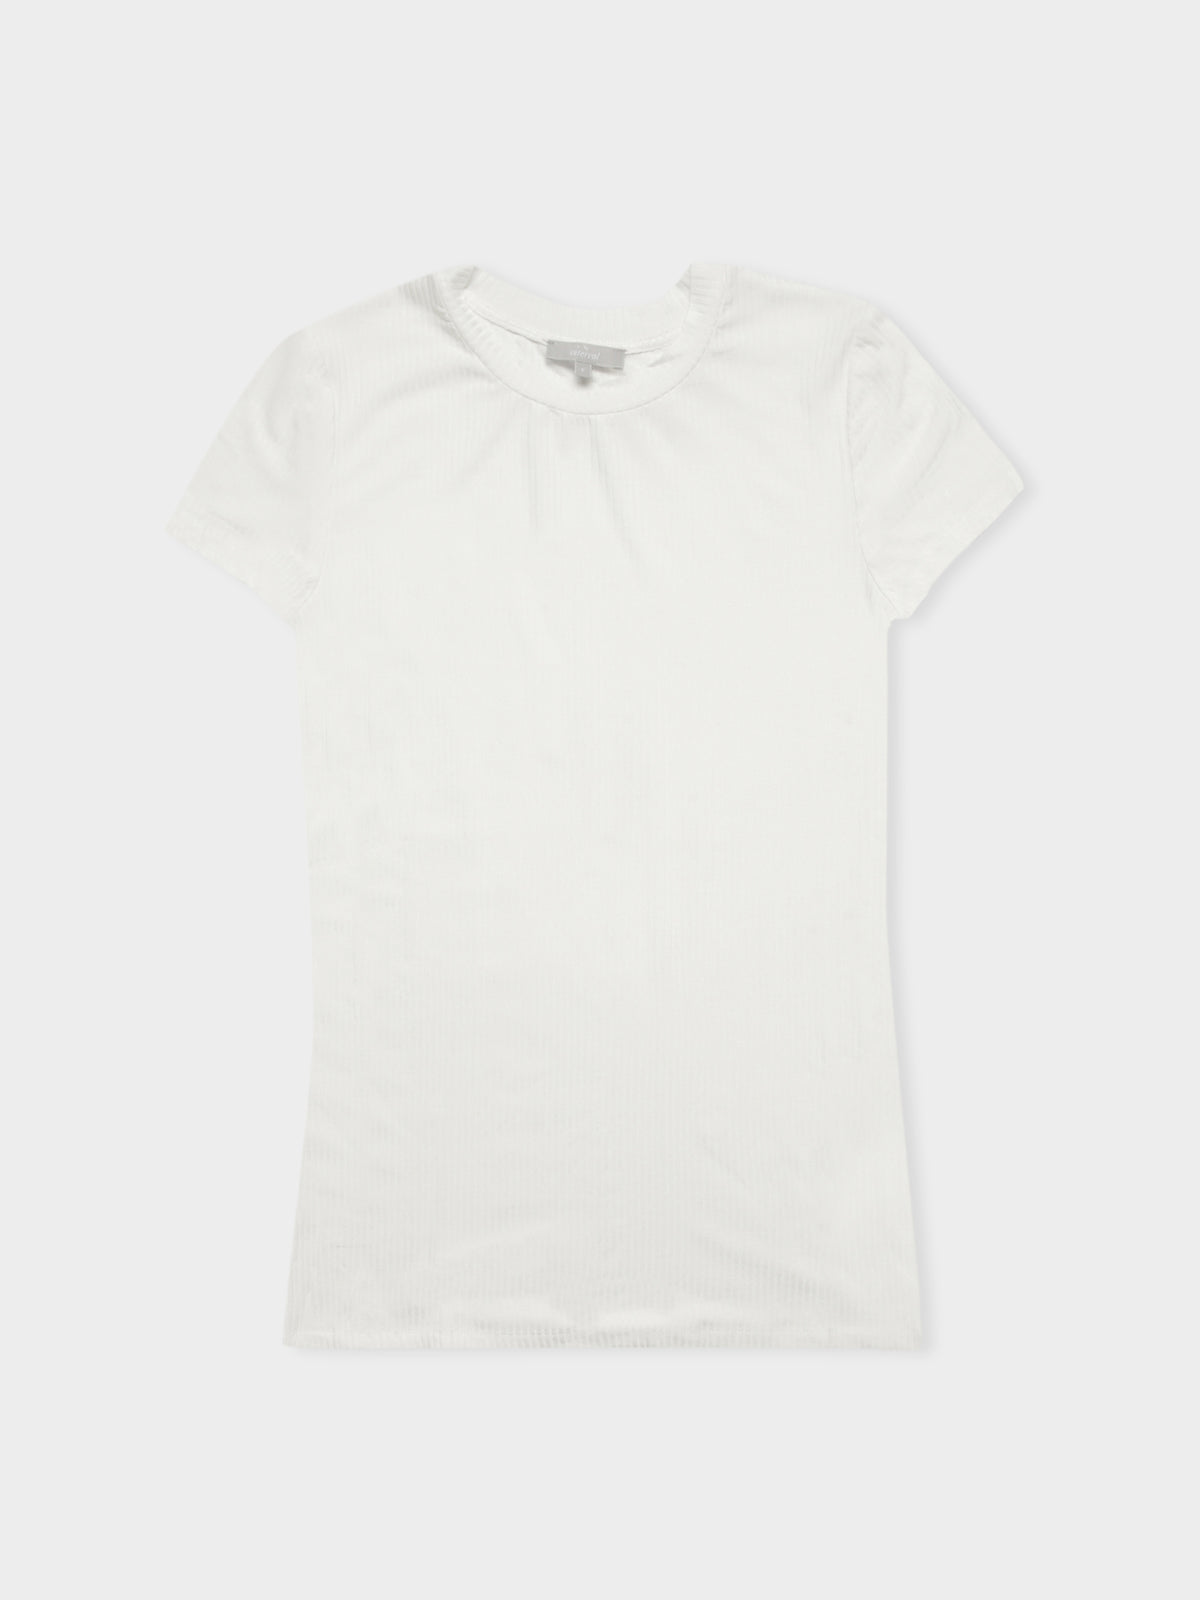 Mika T-Shirt in White